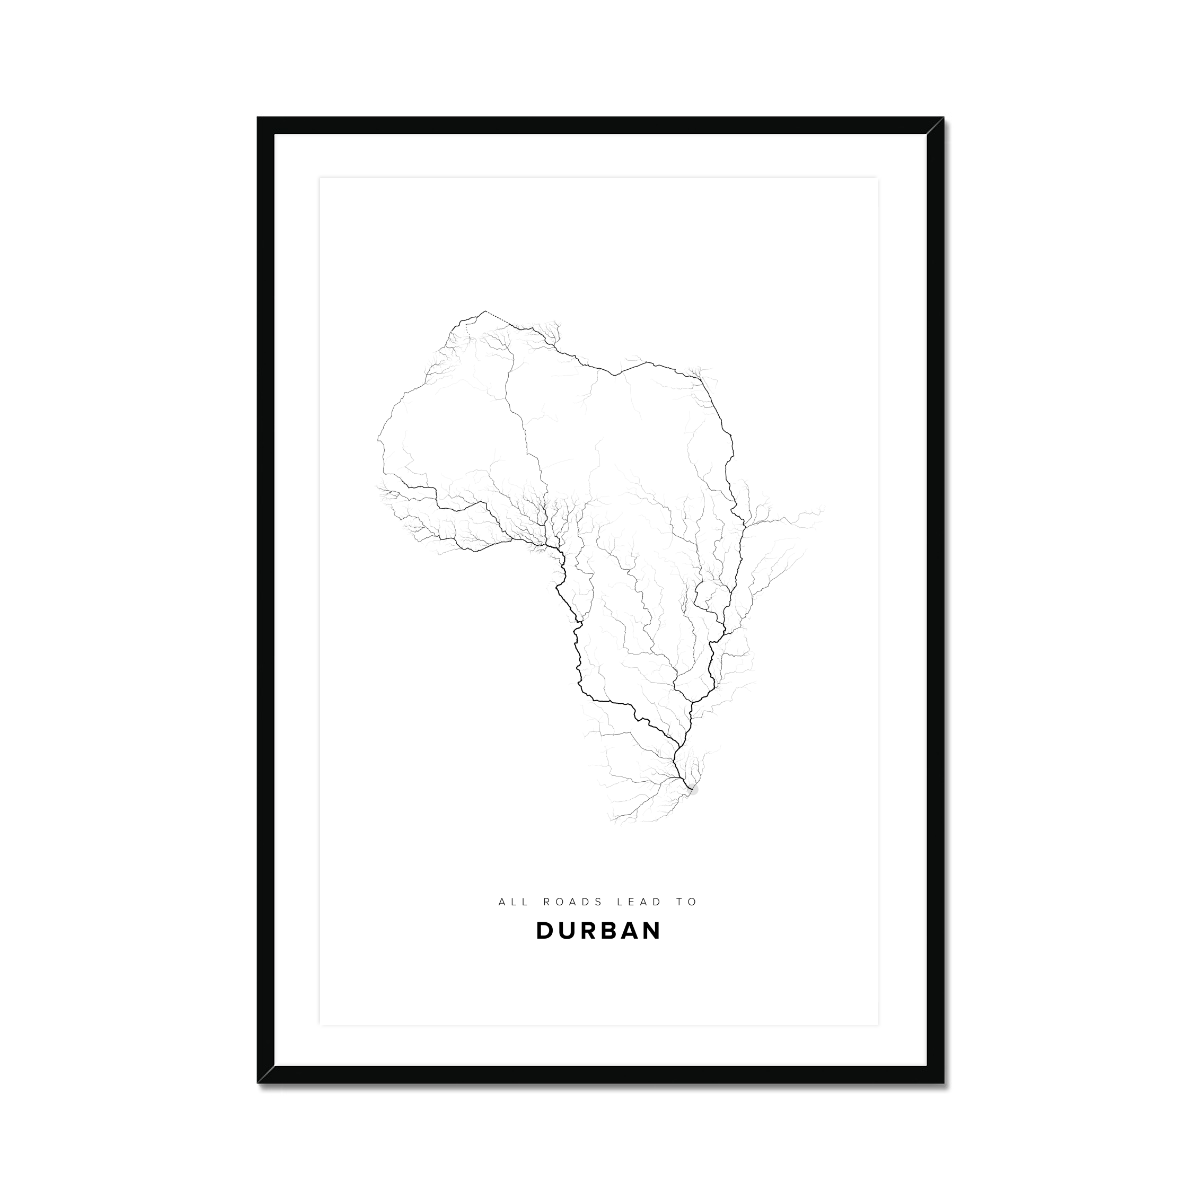 All roads lead to Durban (South Africa) Fine Art Map Print